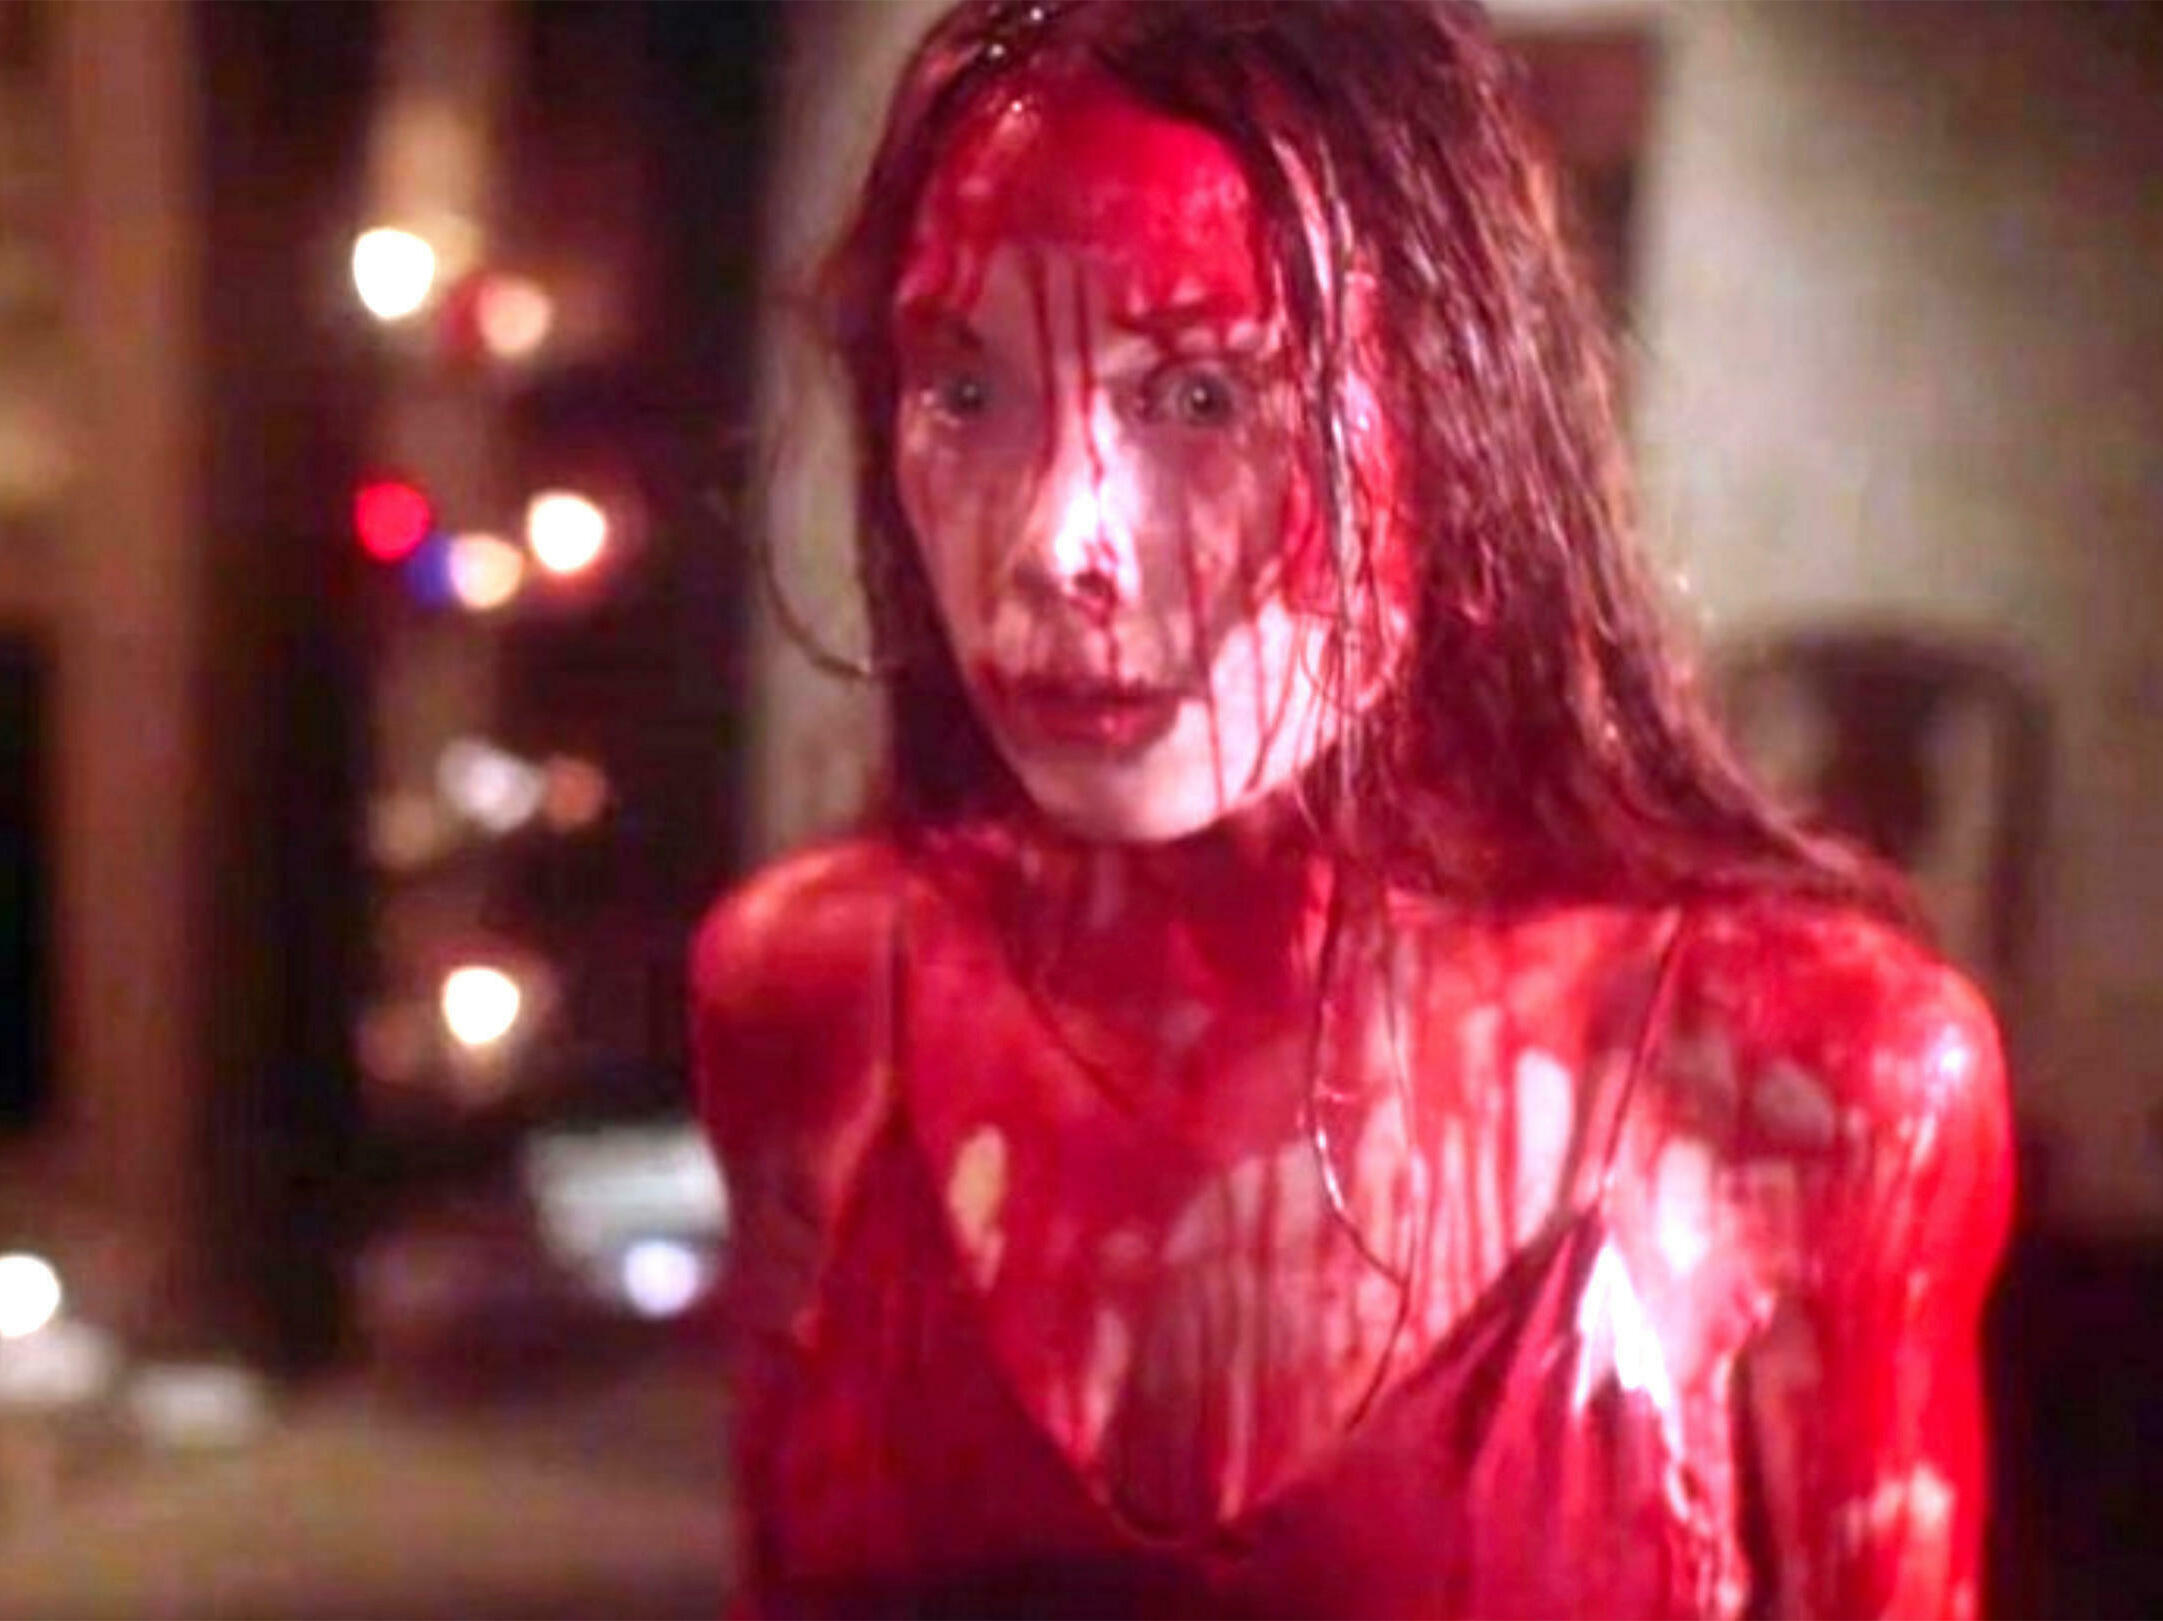 ‘Carrie’ turns 50! Here are the best Stephen King novels — chosen by you